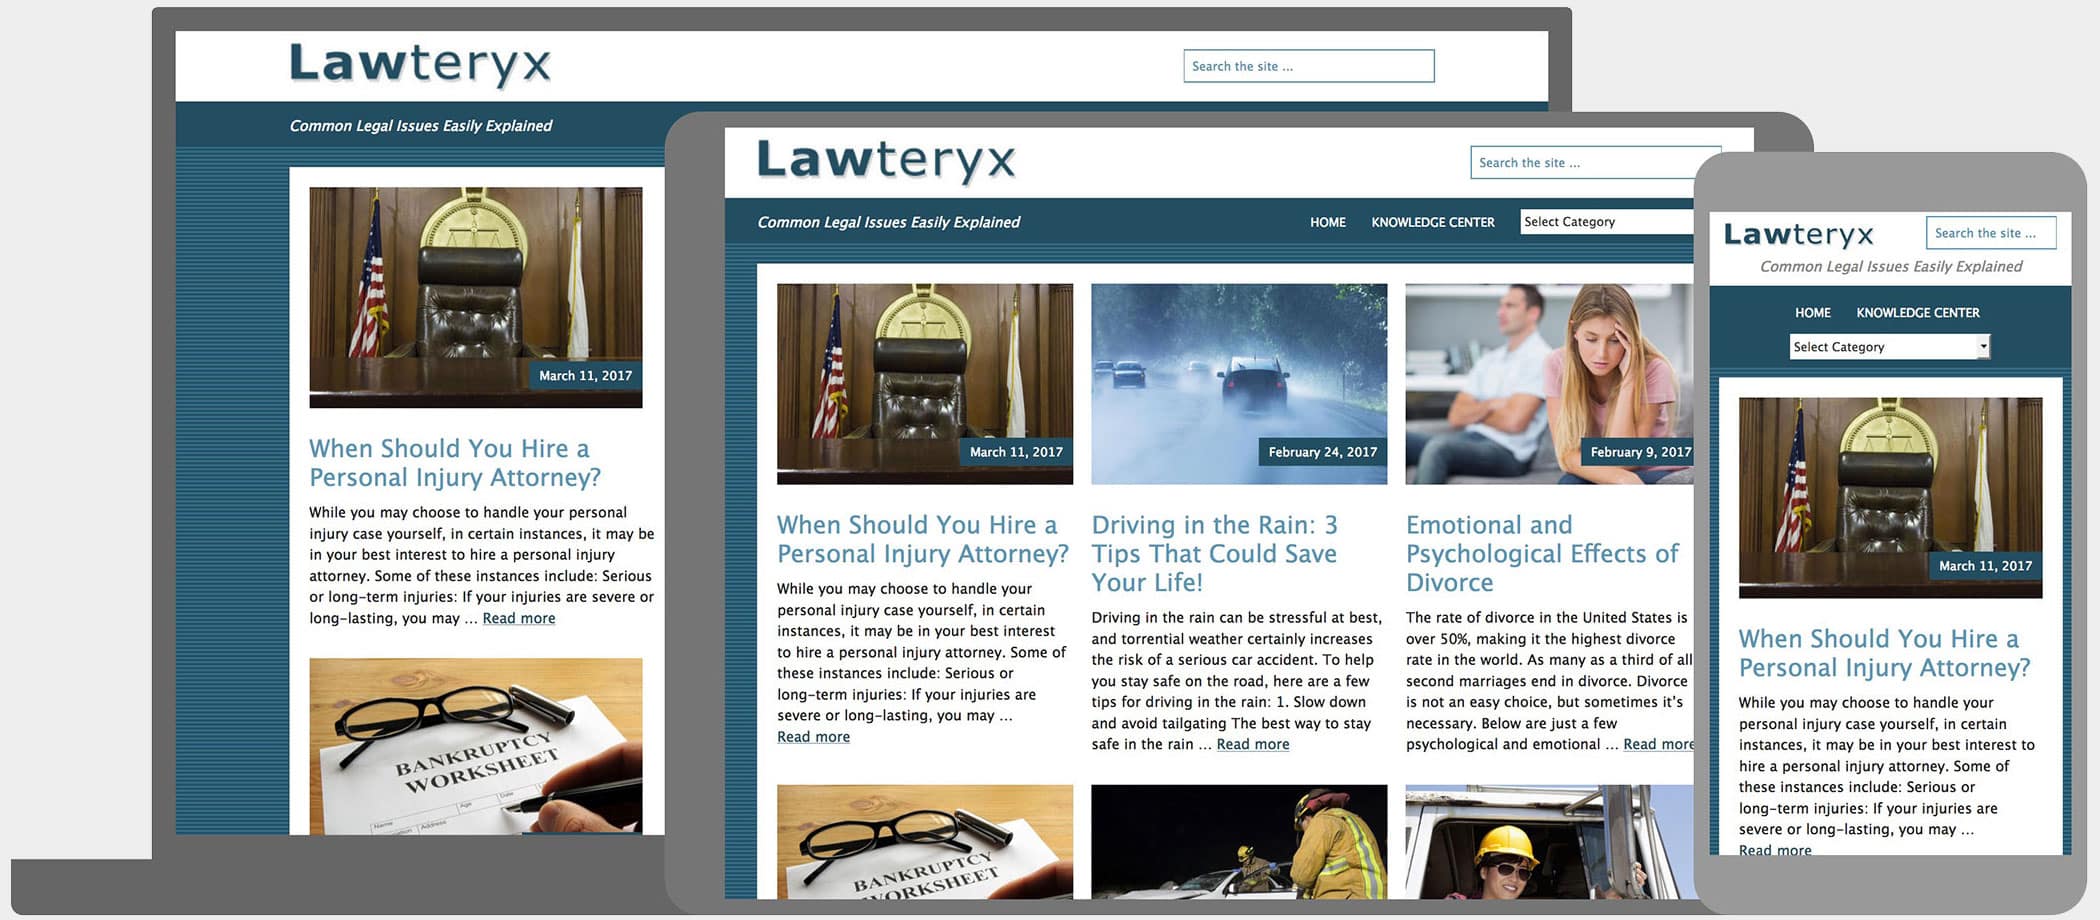 Lawteryx: SEO friendly design featuring analytics & reporting, blog, knowledge center and responsive site